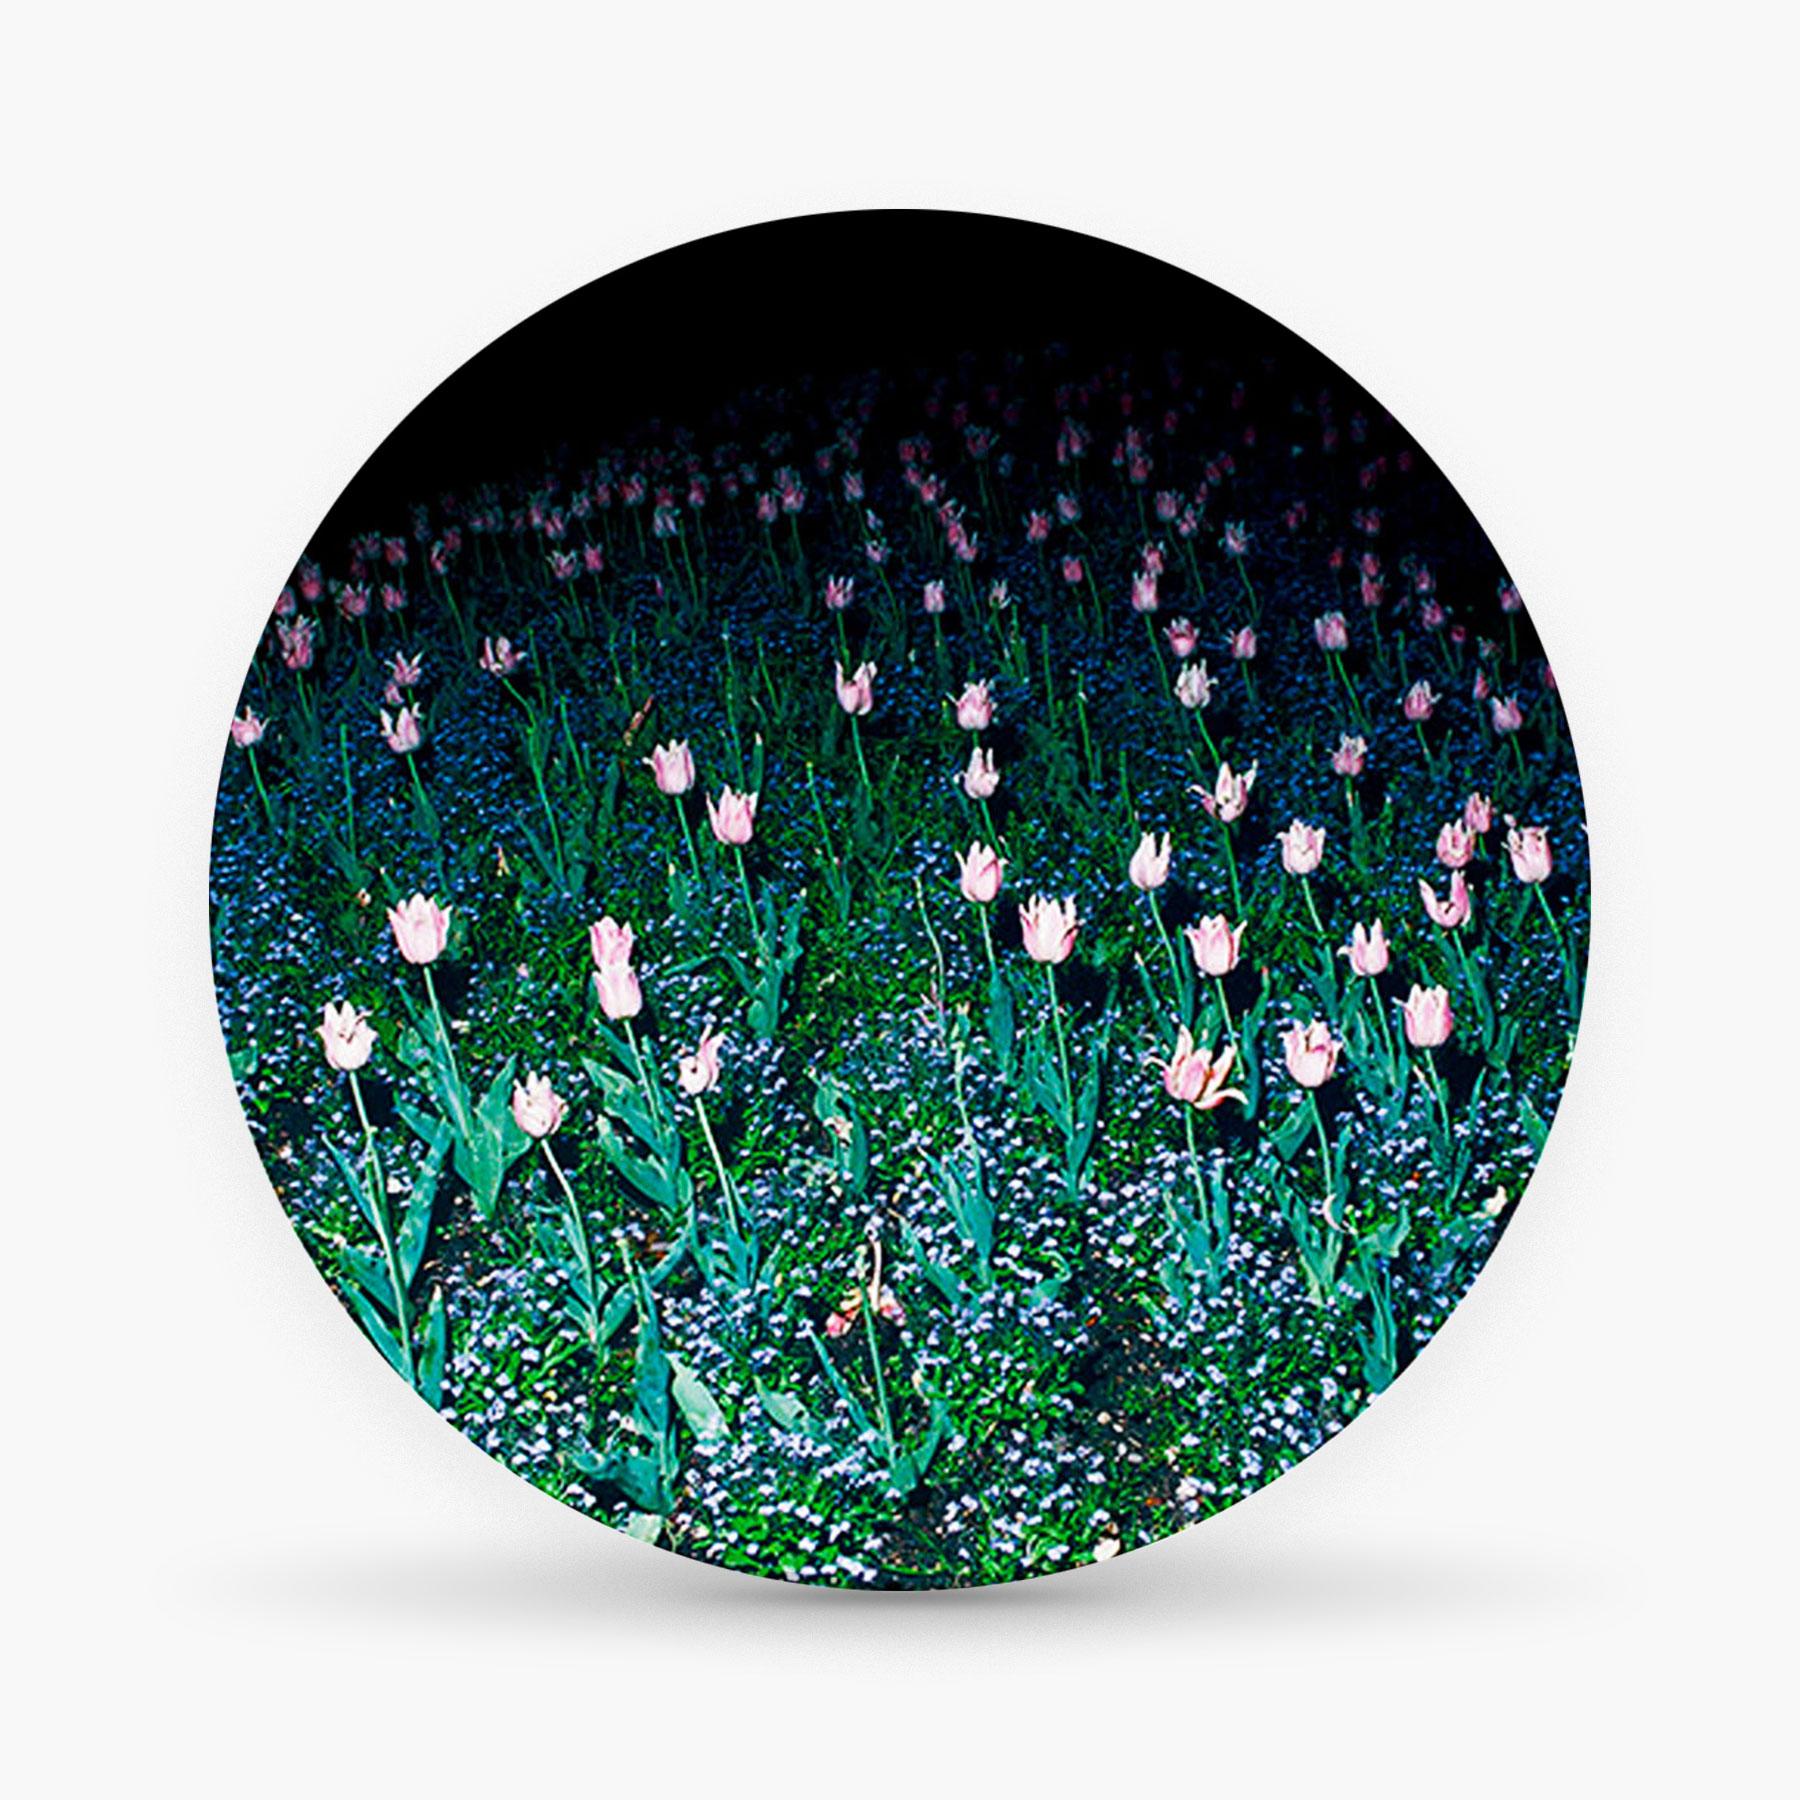 Charles Petit is a photographer-urban poet. Here a square flashed at night of Rue de Paradis in the seventies. An electrical manner to see the garden at night.

Porcelain of Limoges extra fine.
Colors serigraphy.
Diameter : 10.6